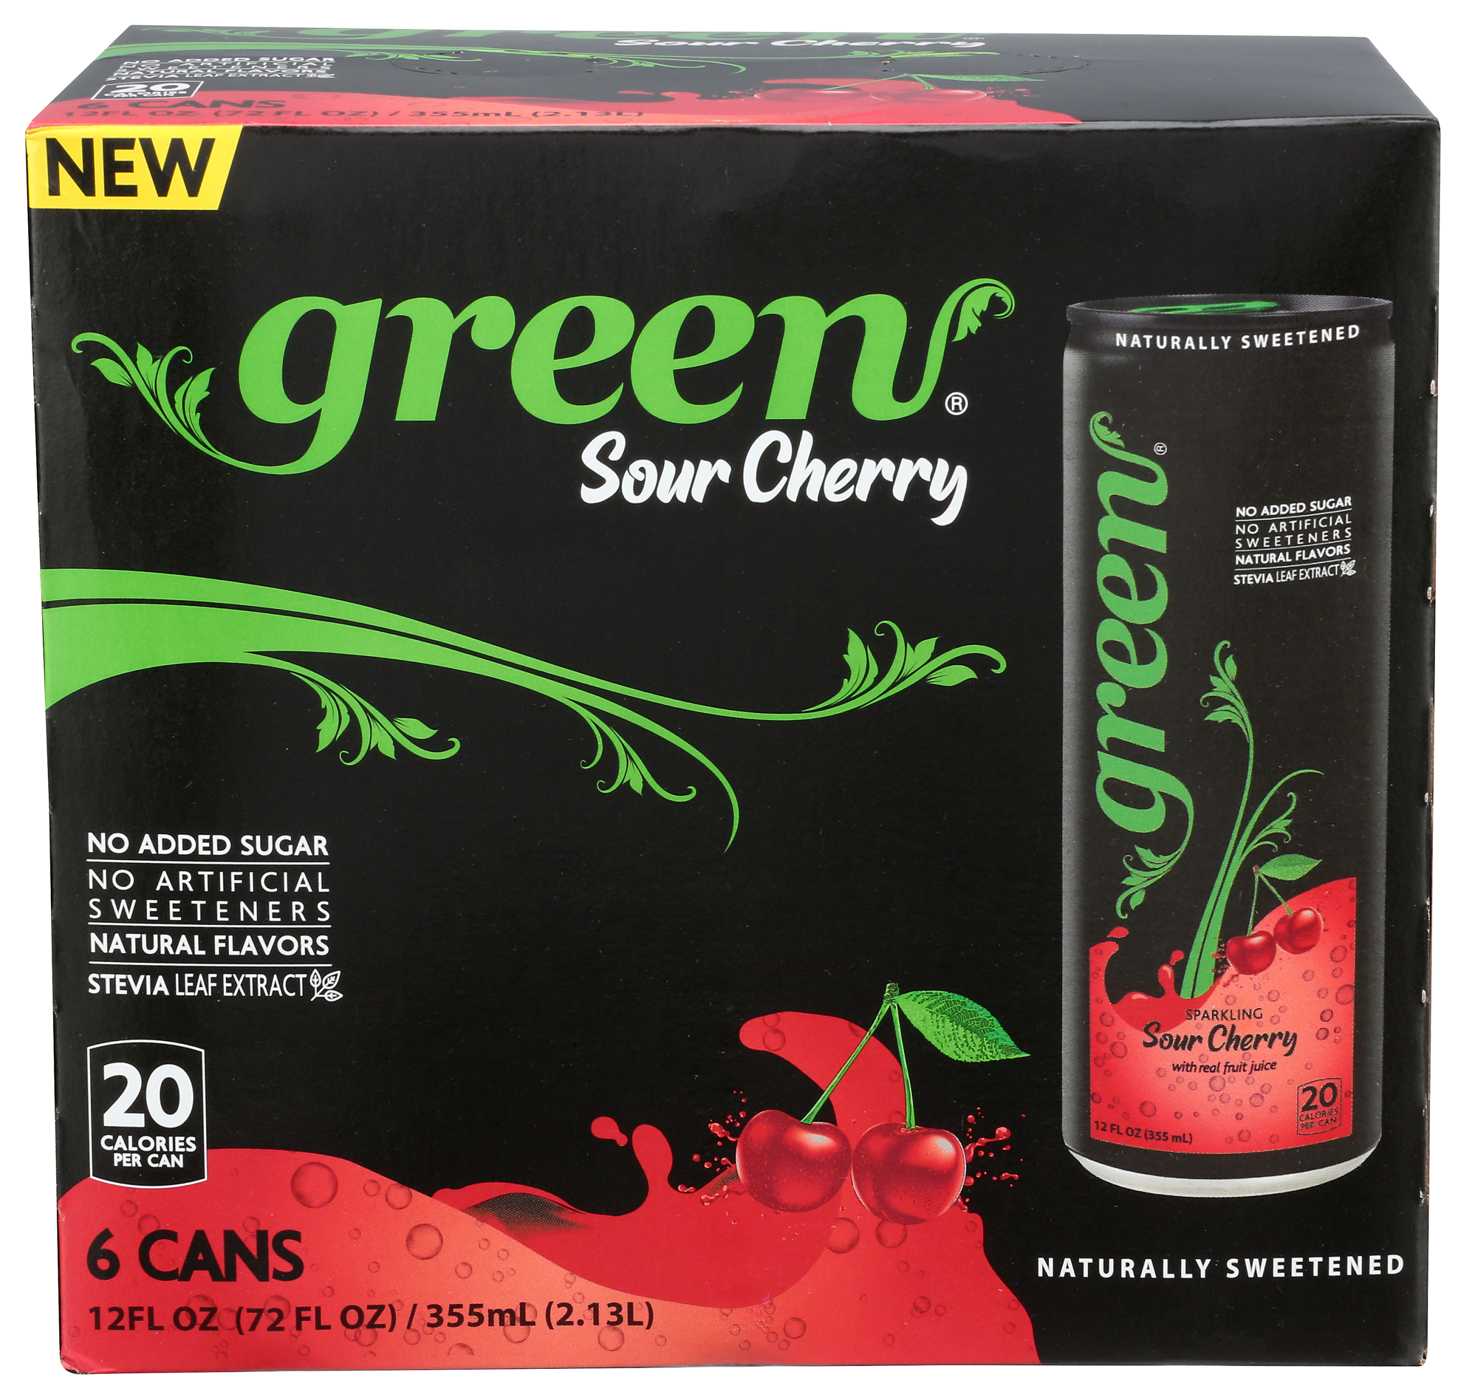 Green Sparkling Sour Cherry Soda 12 oz Cans; image 1 of 3